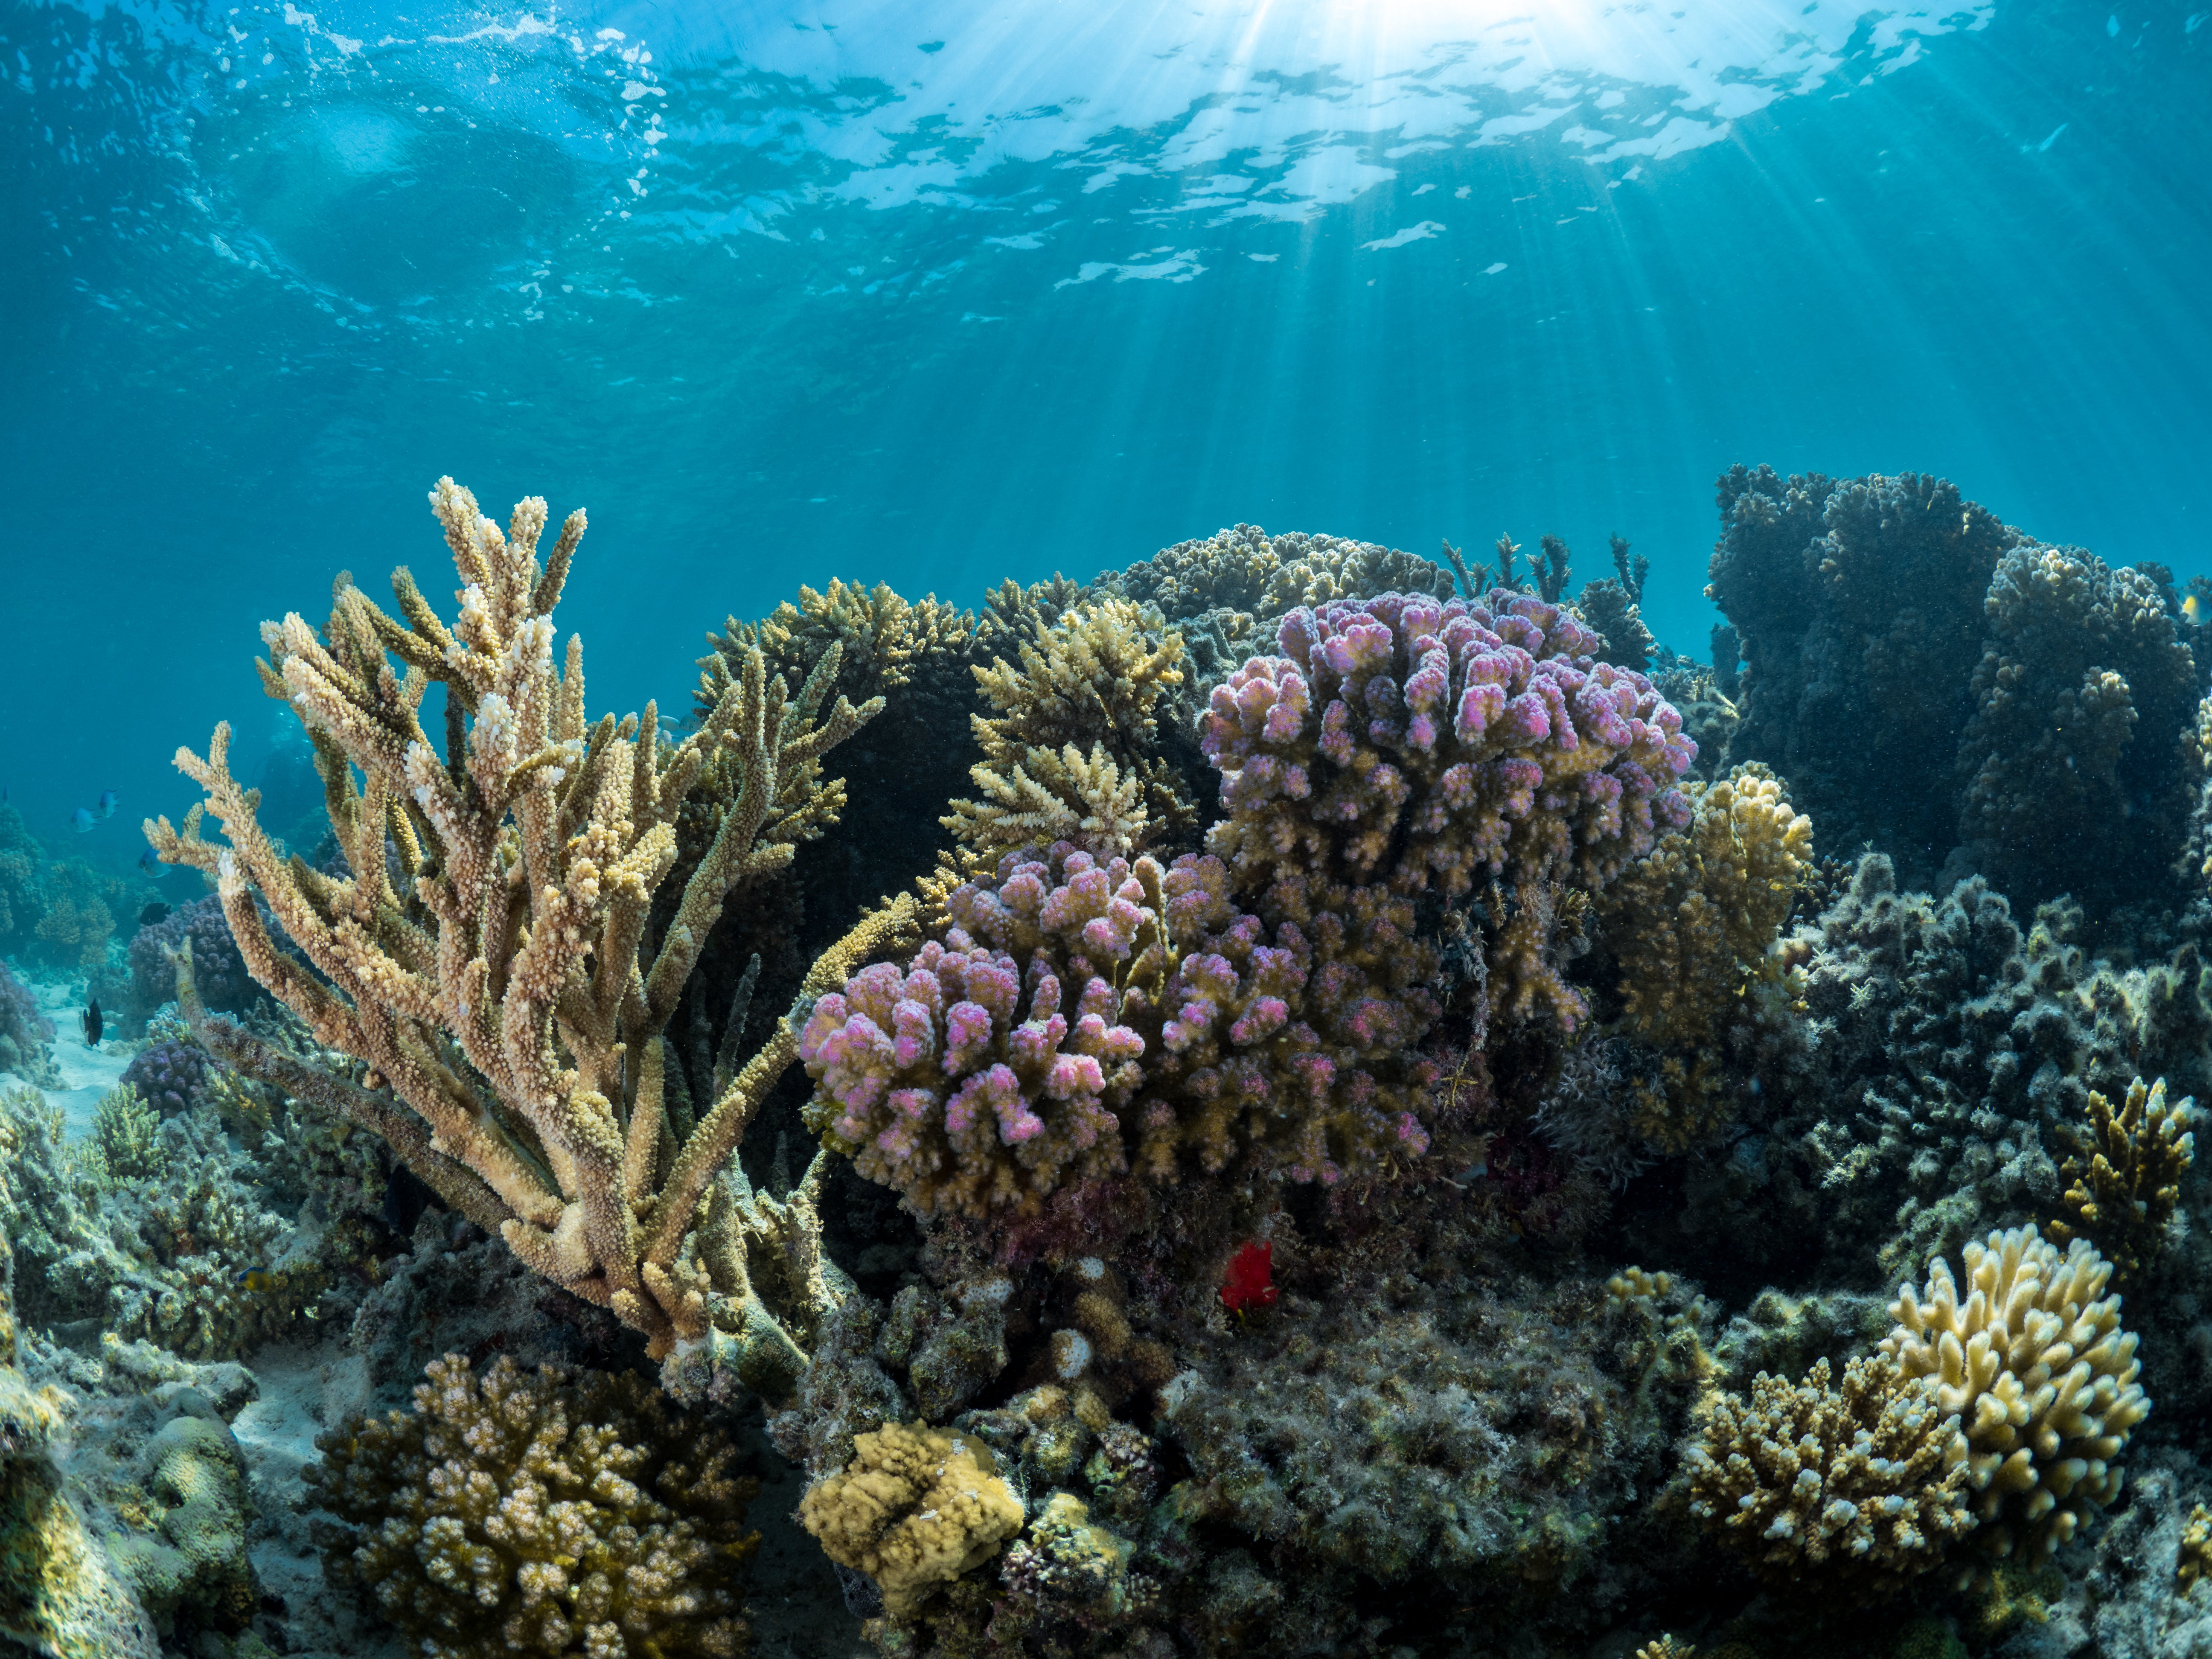 The Red Sea is an area of stunning biodiversity